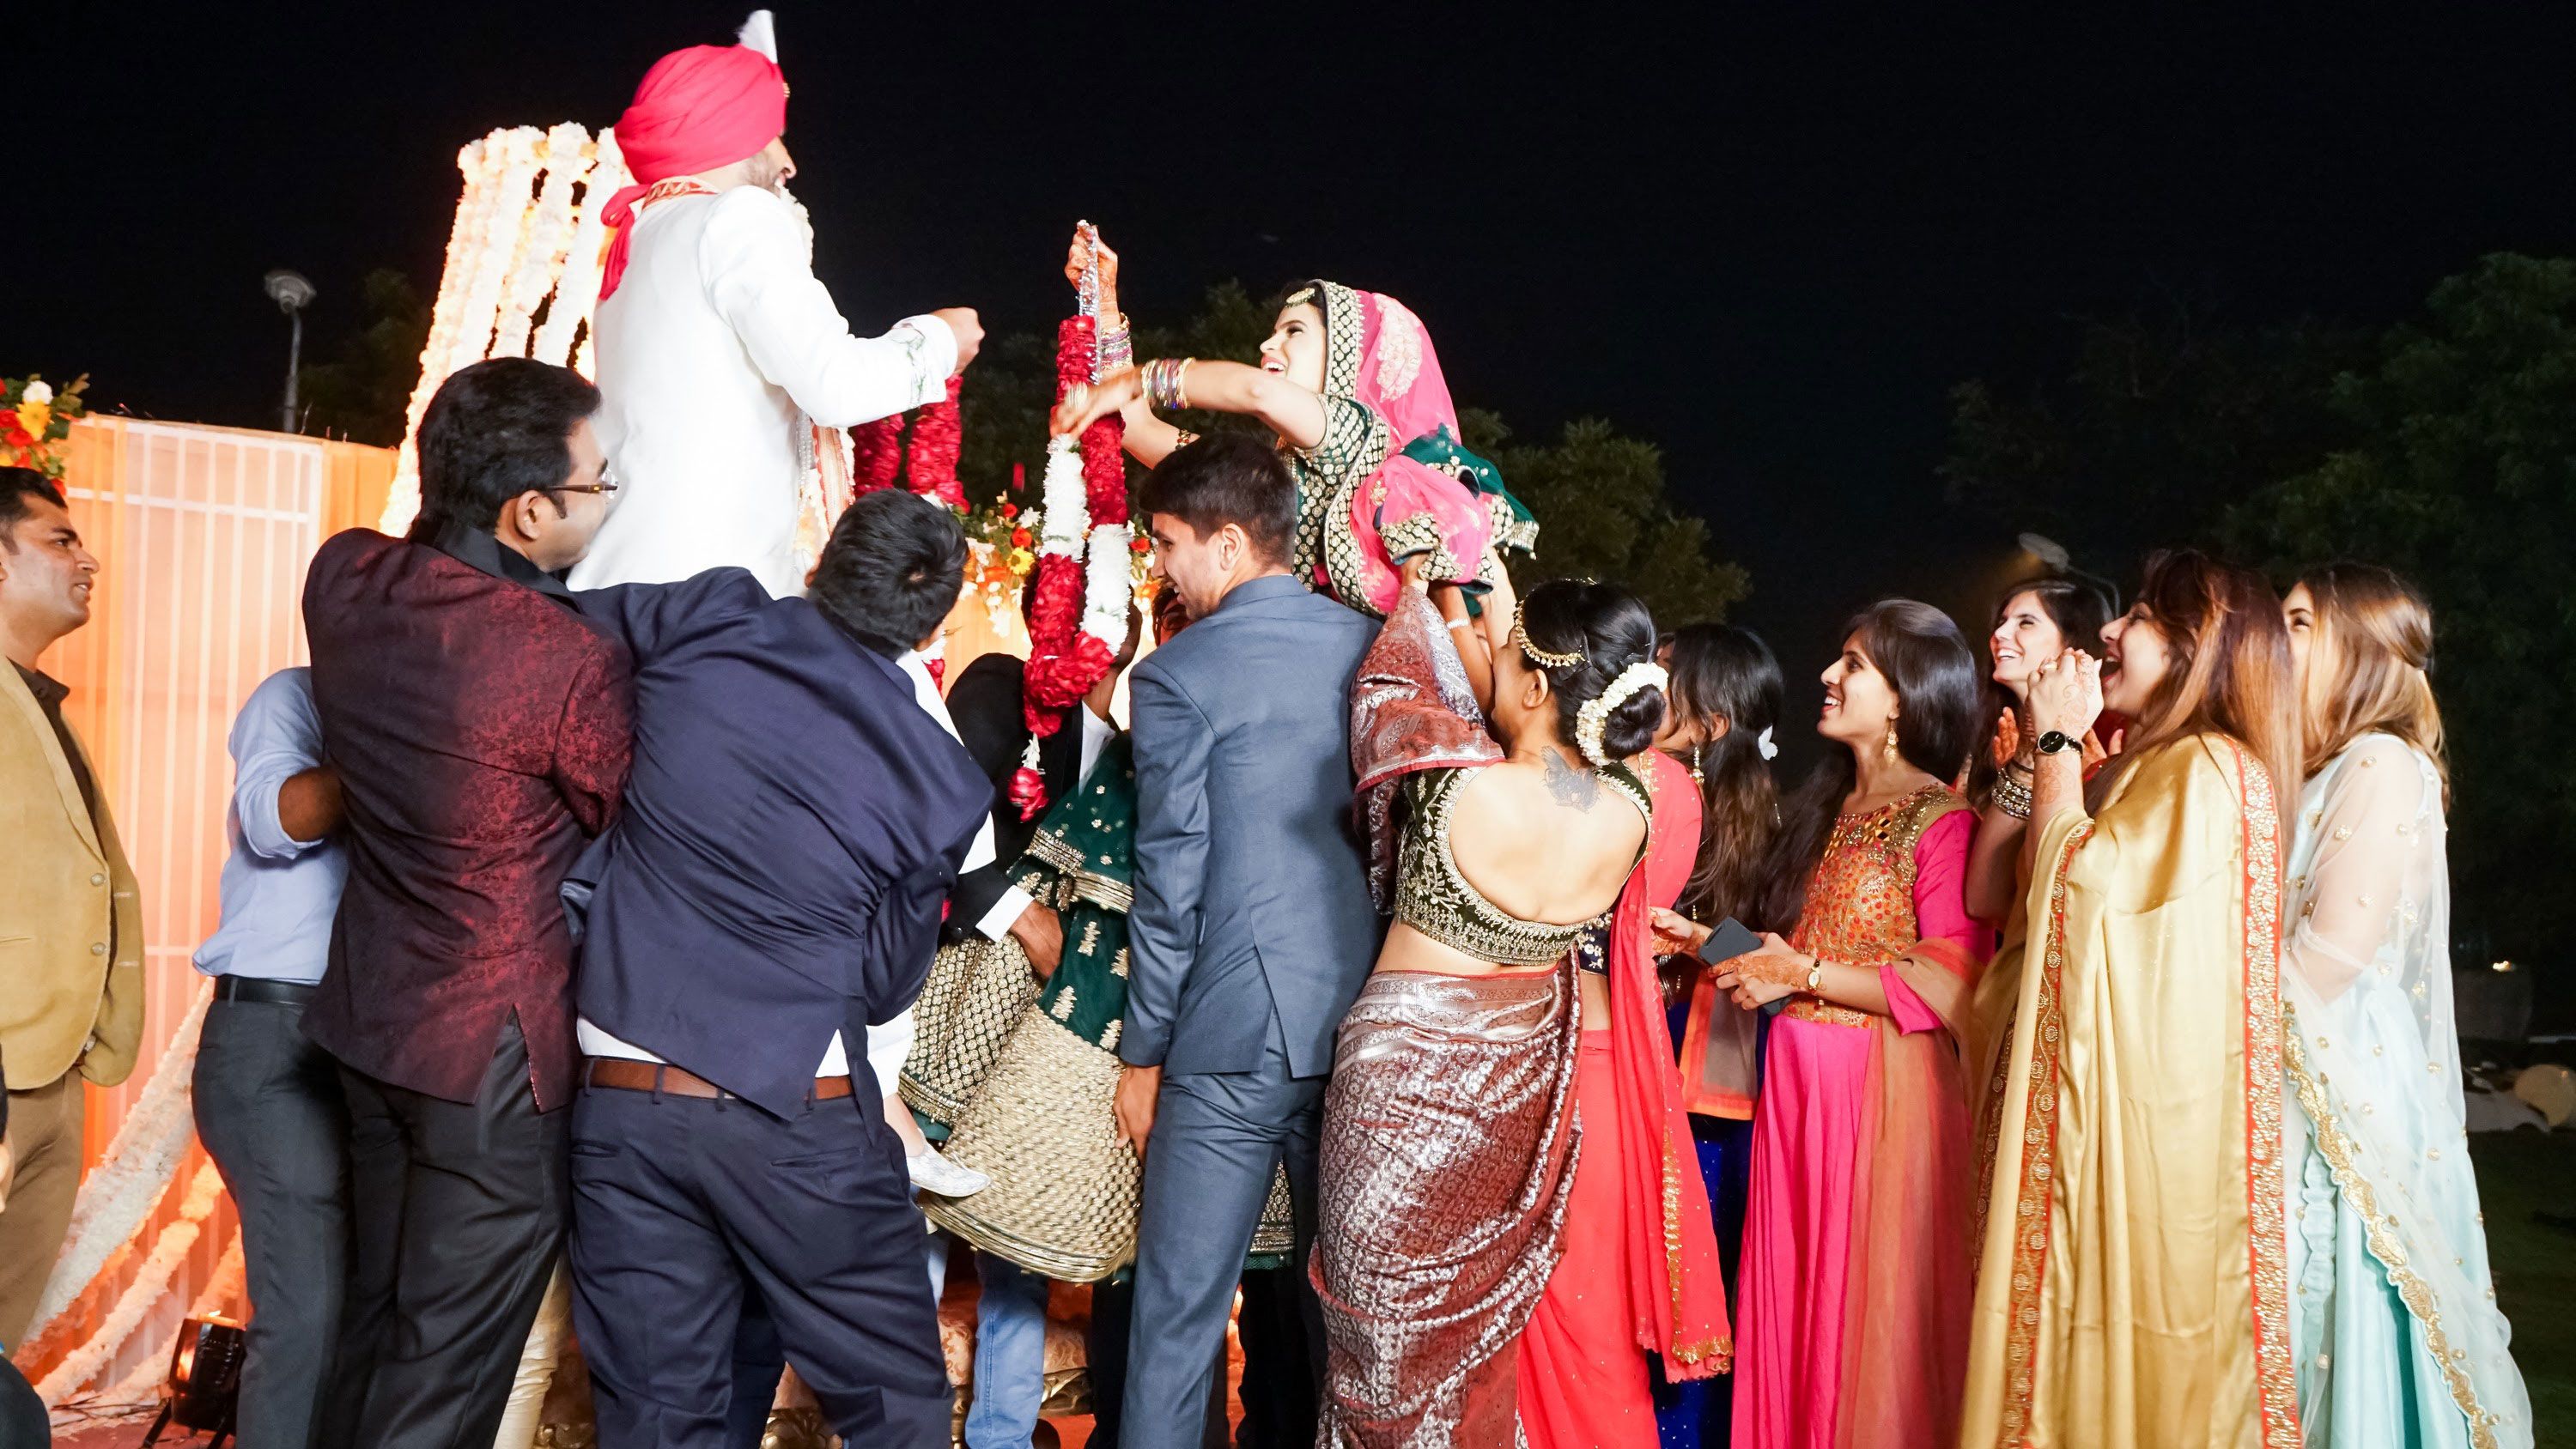 11 Things To Expect When Attending An Indian Wedding